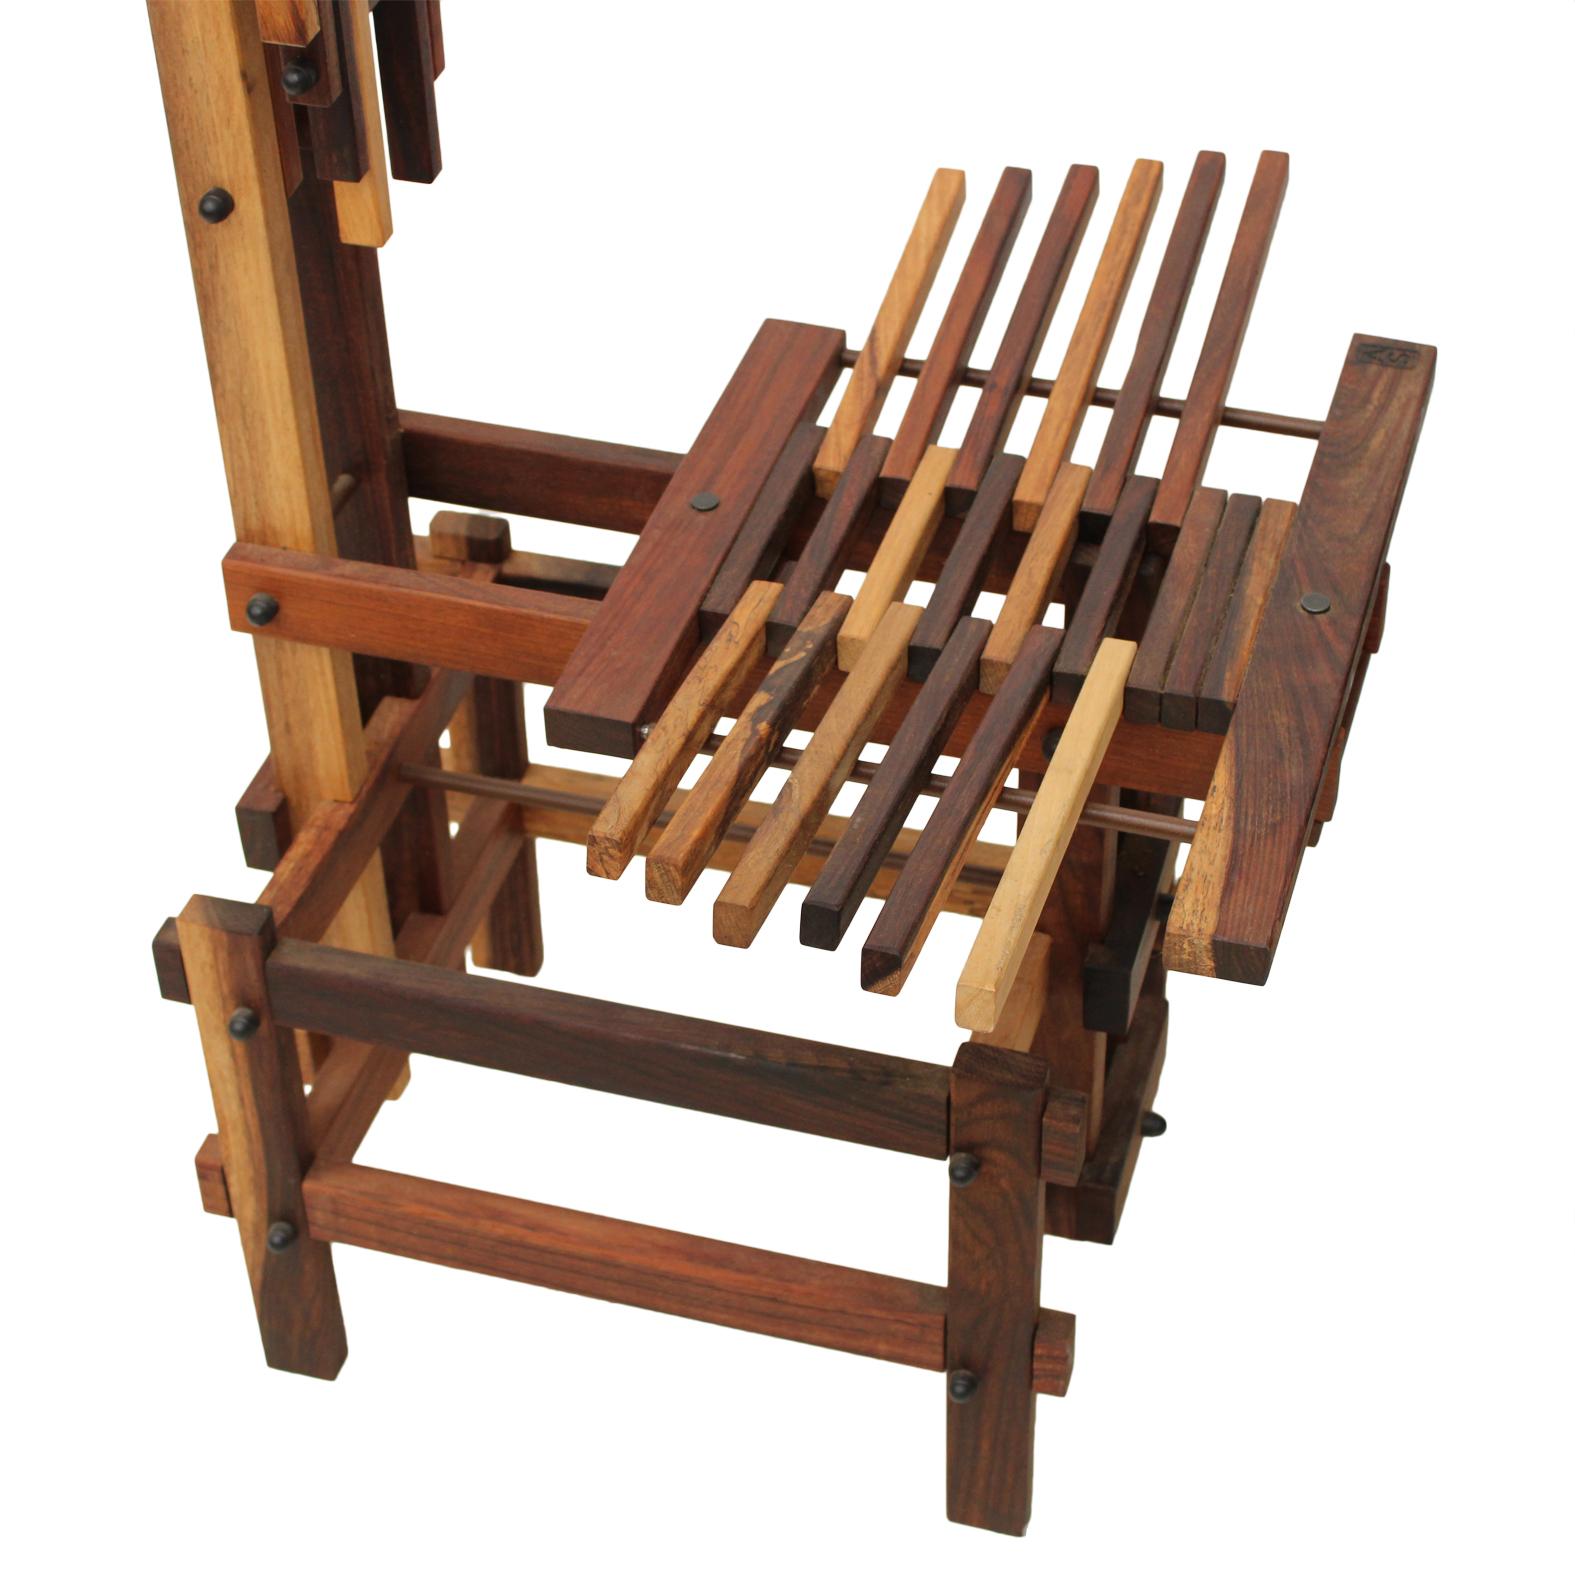 Italian Sono Sculptural Wood Chair Designed by Anacleto Spazzapan 